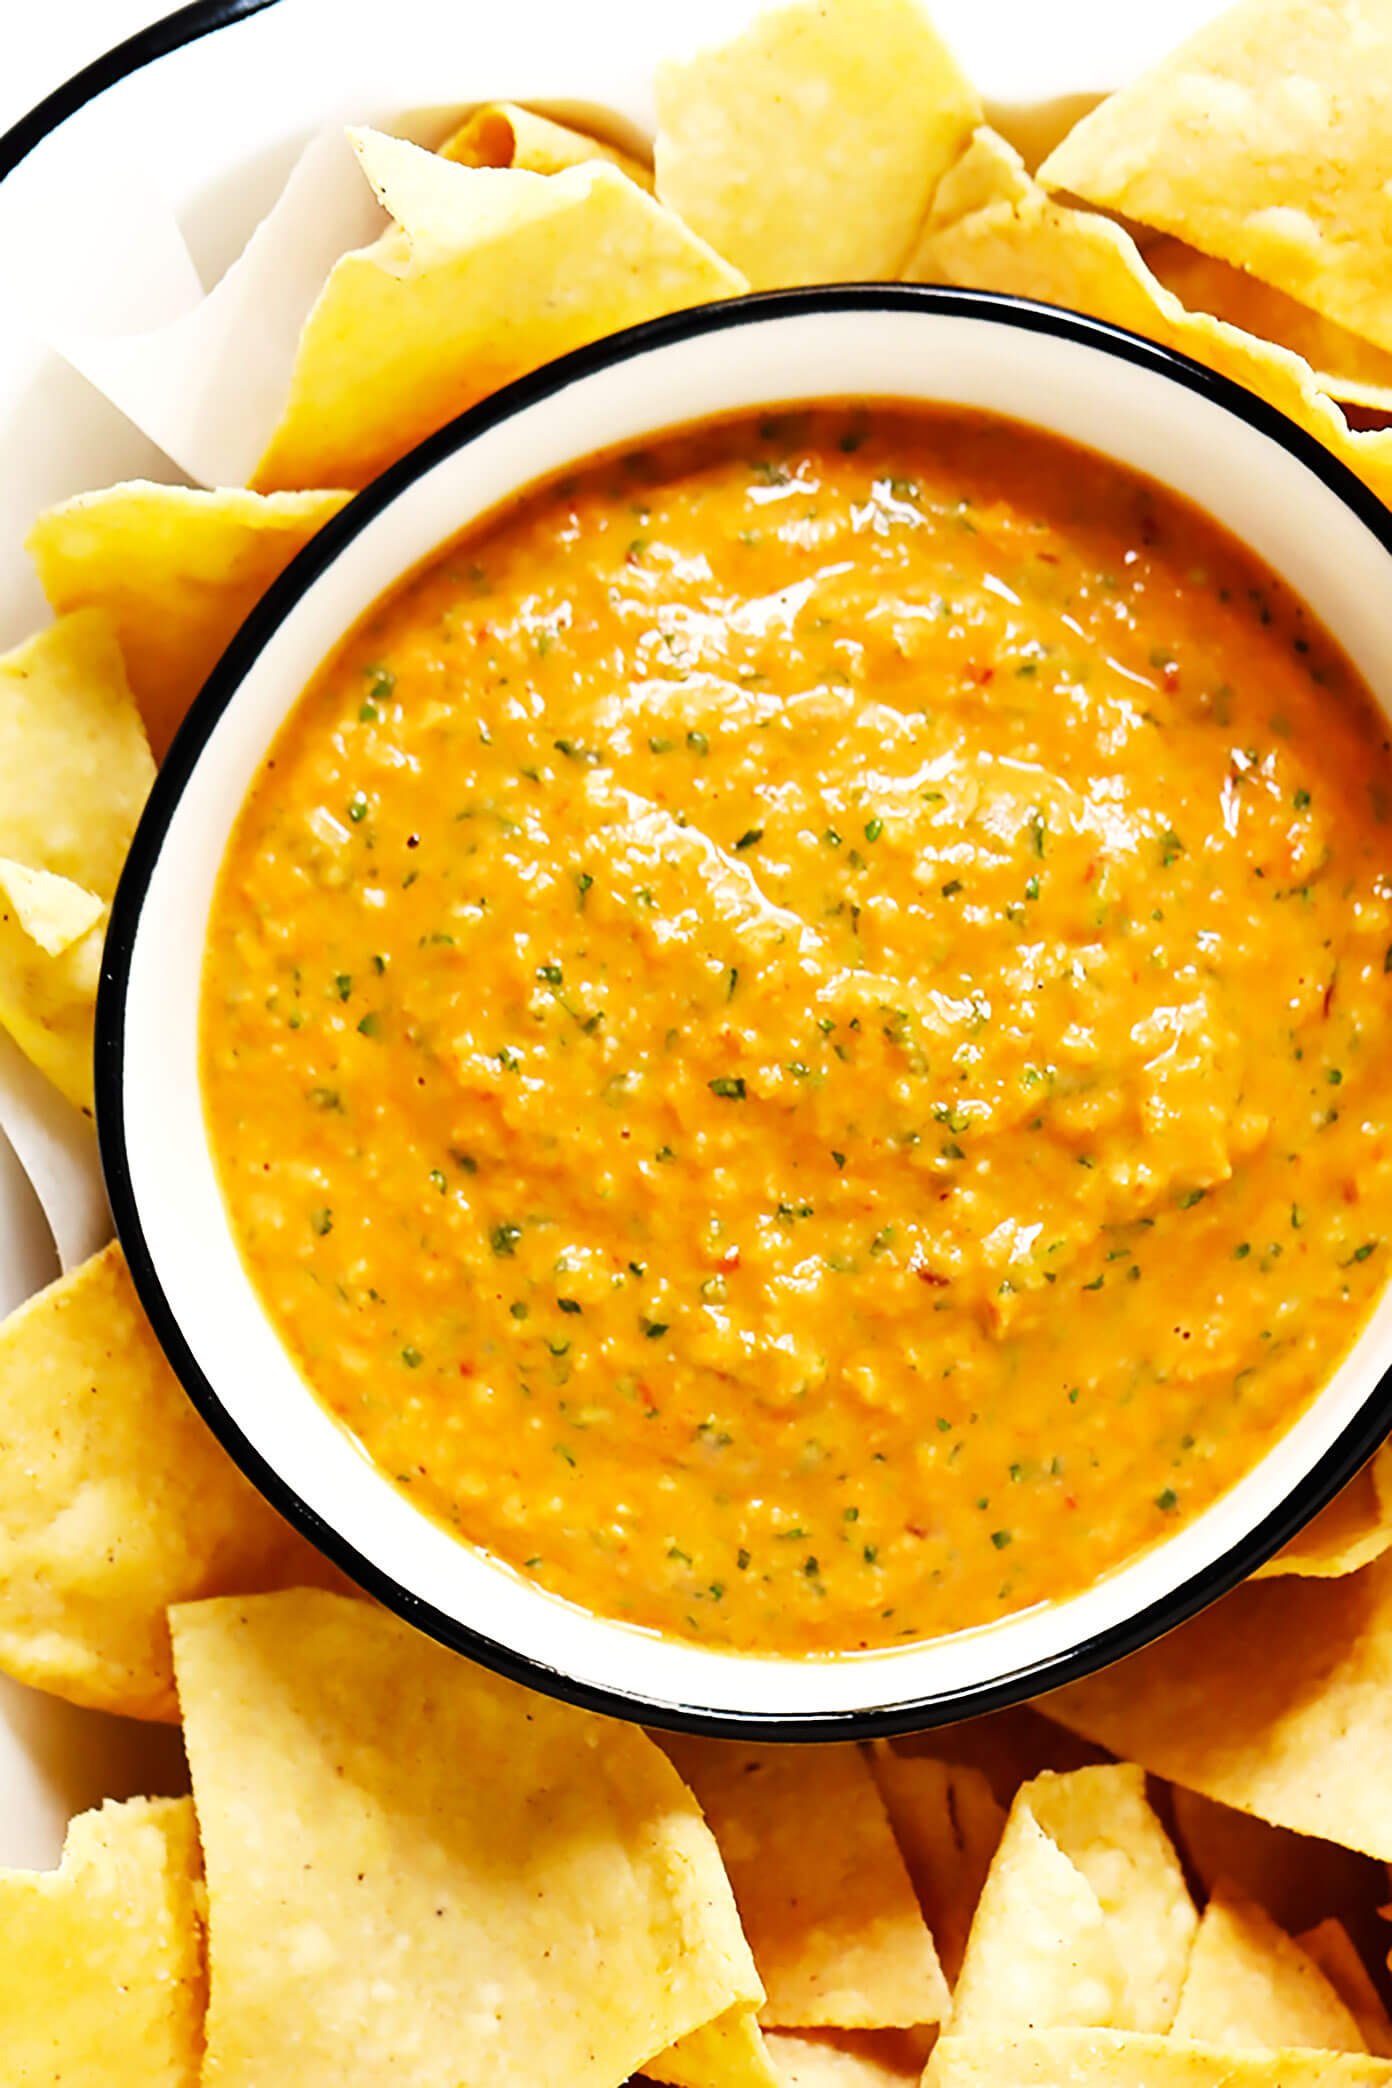 Chipotle Peanut Salsa in a bowl with tortilla chips